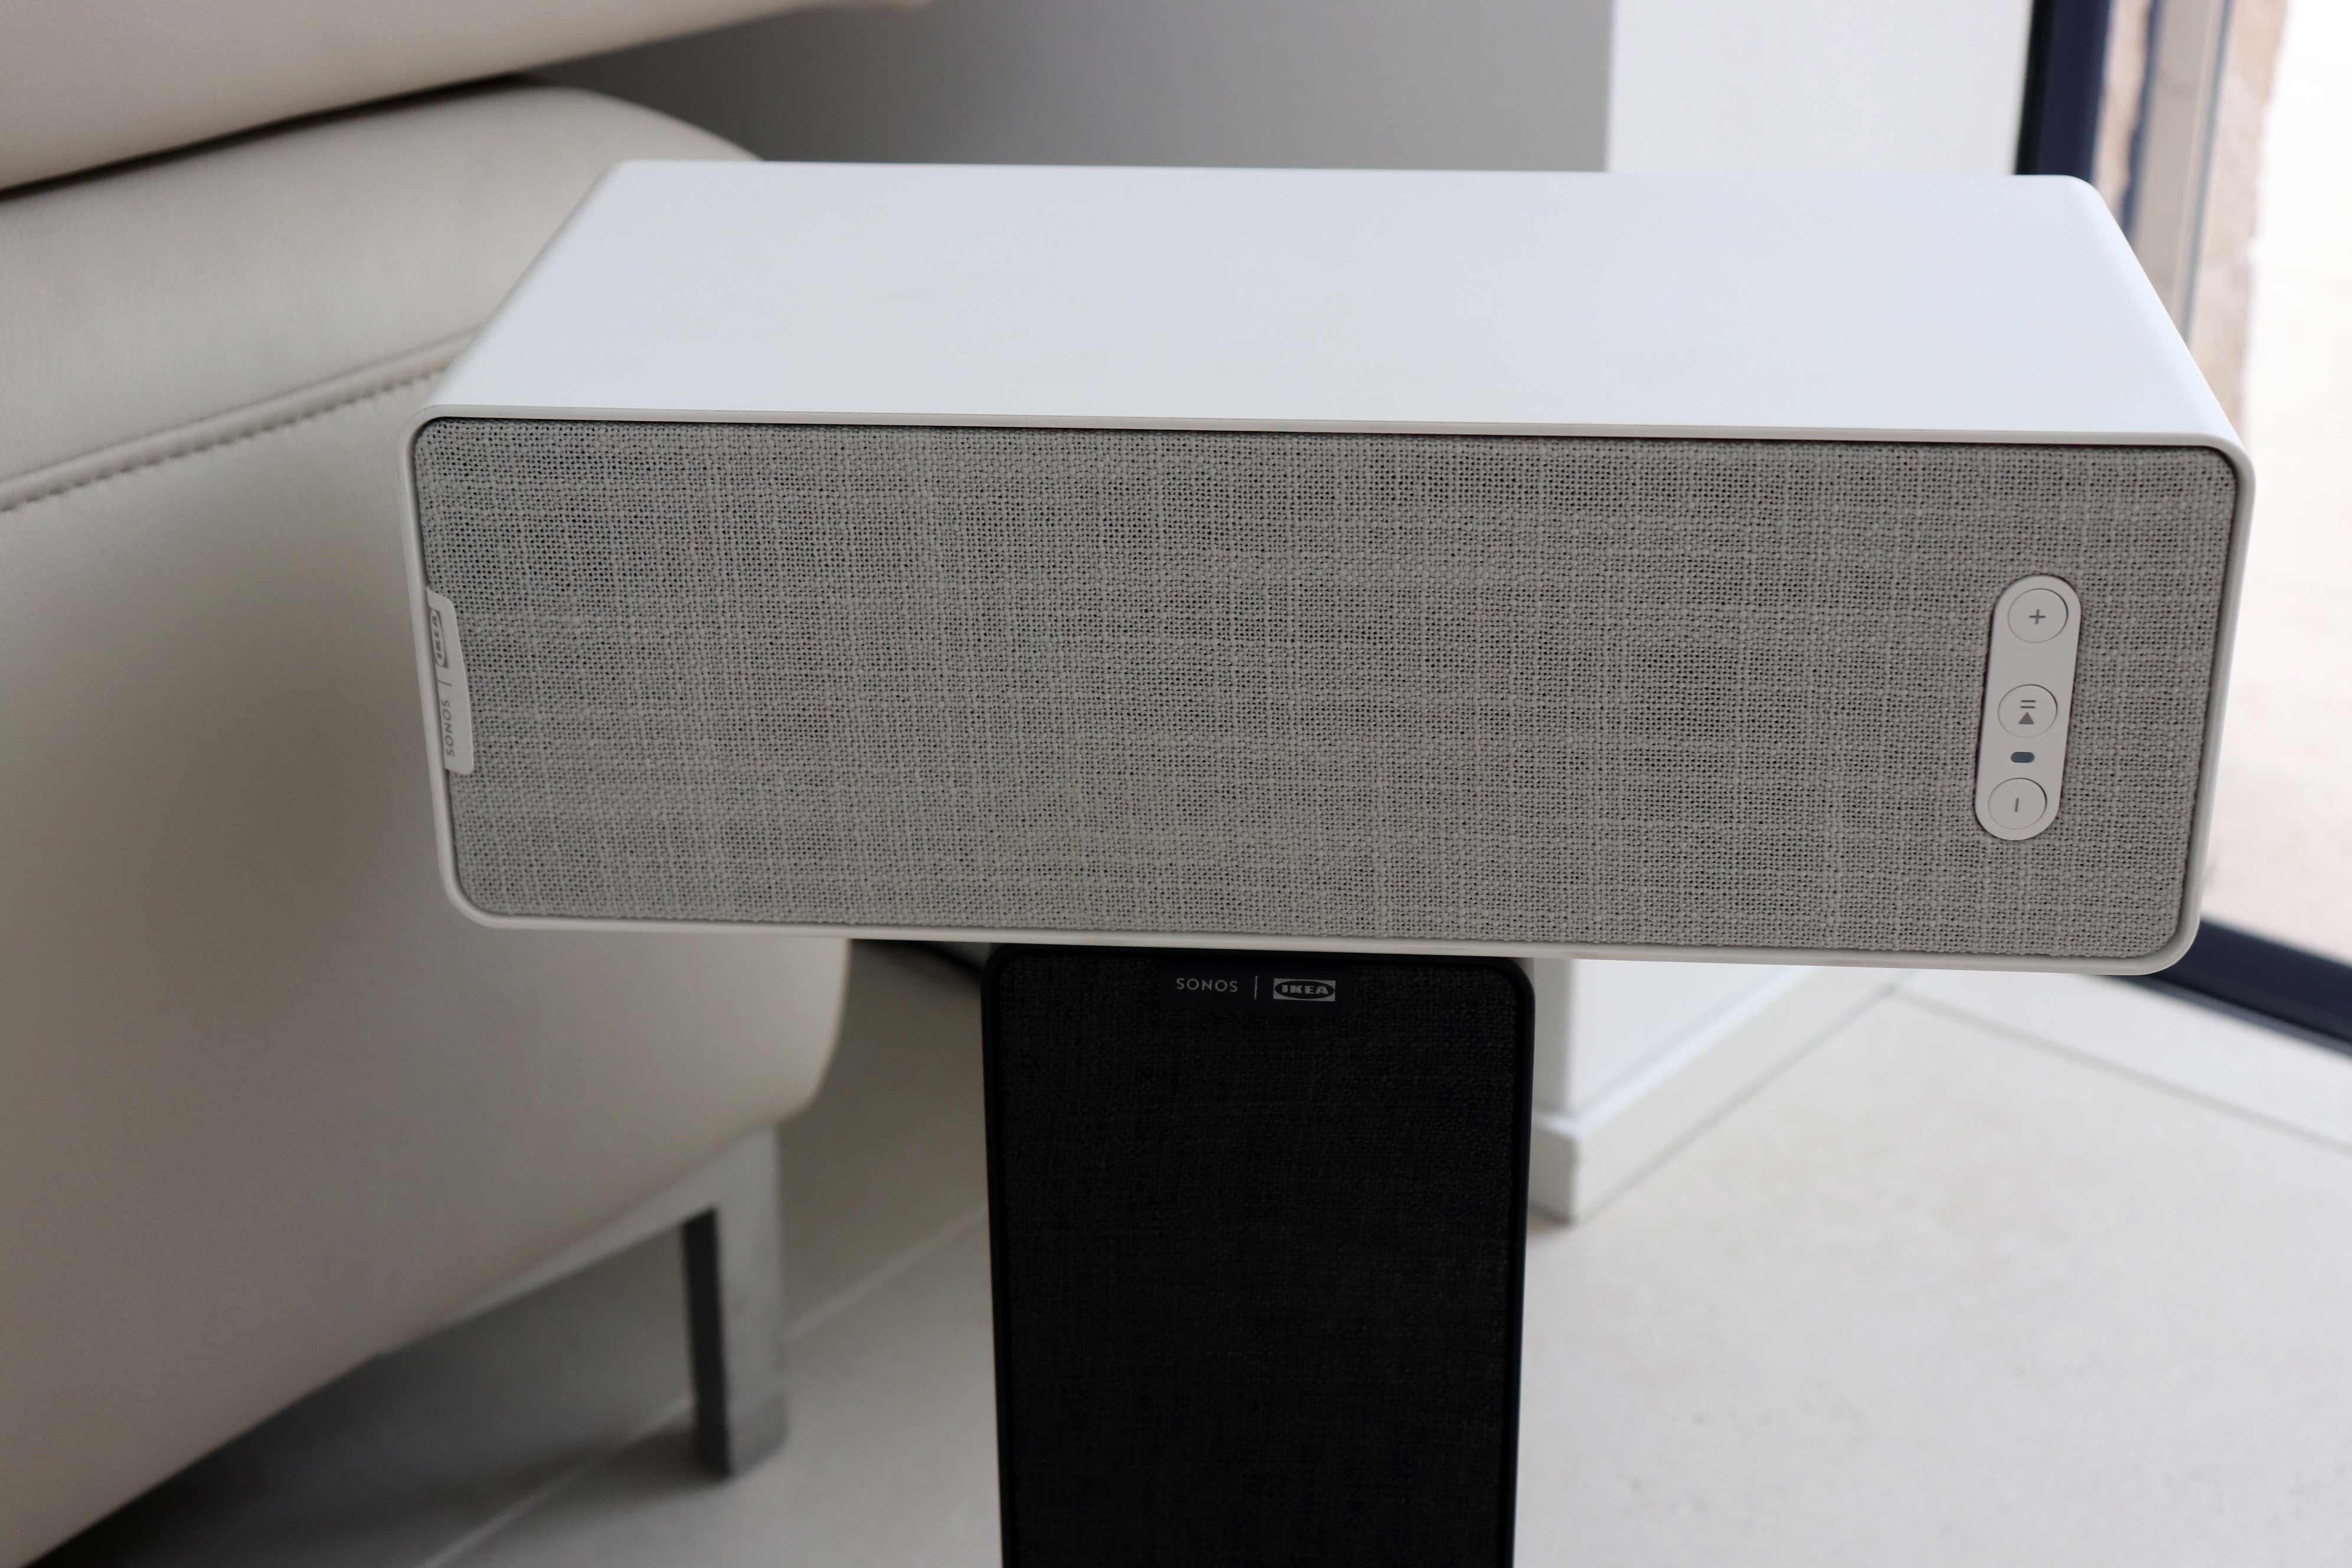 Alabama Opa ambitie IKEA Symfonisk review: The shelf and table lamp speakers with Sonos core